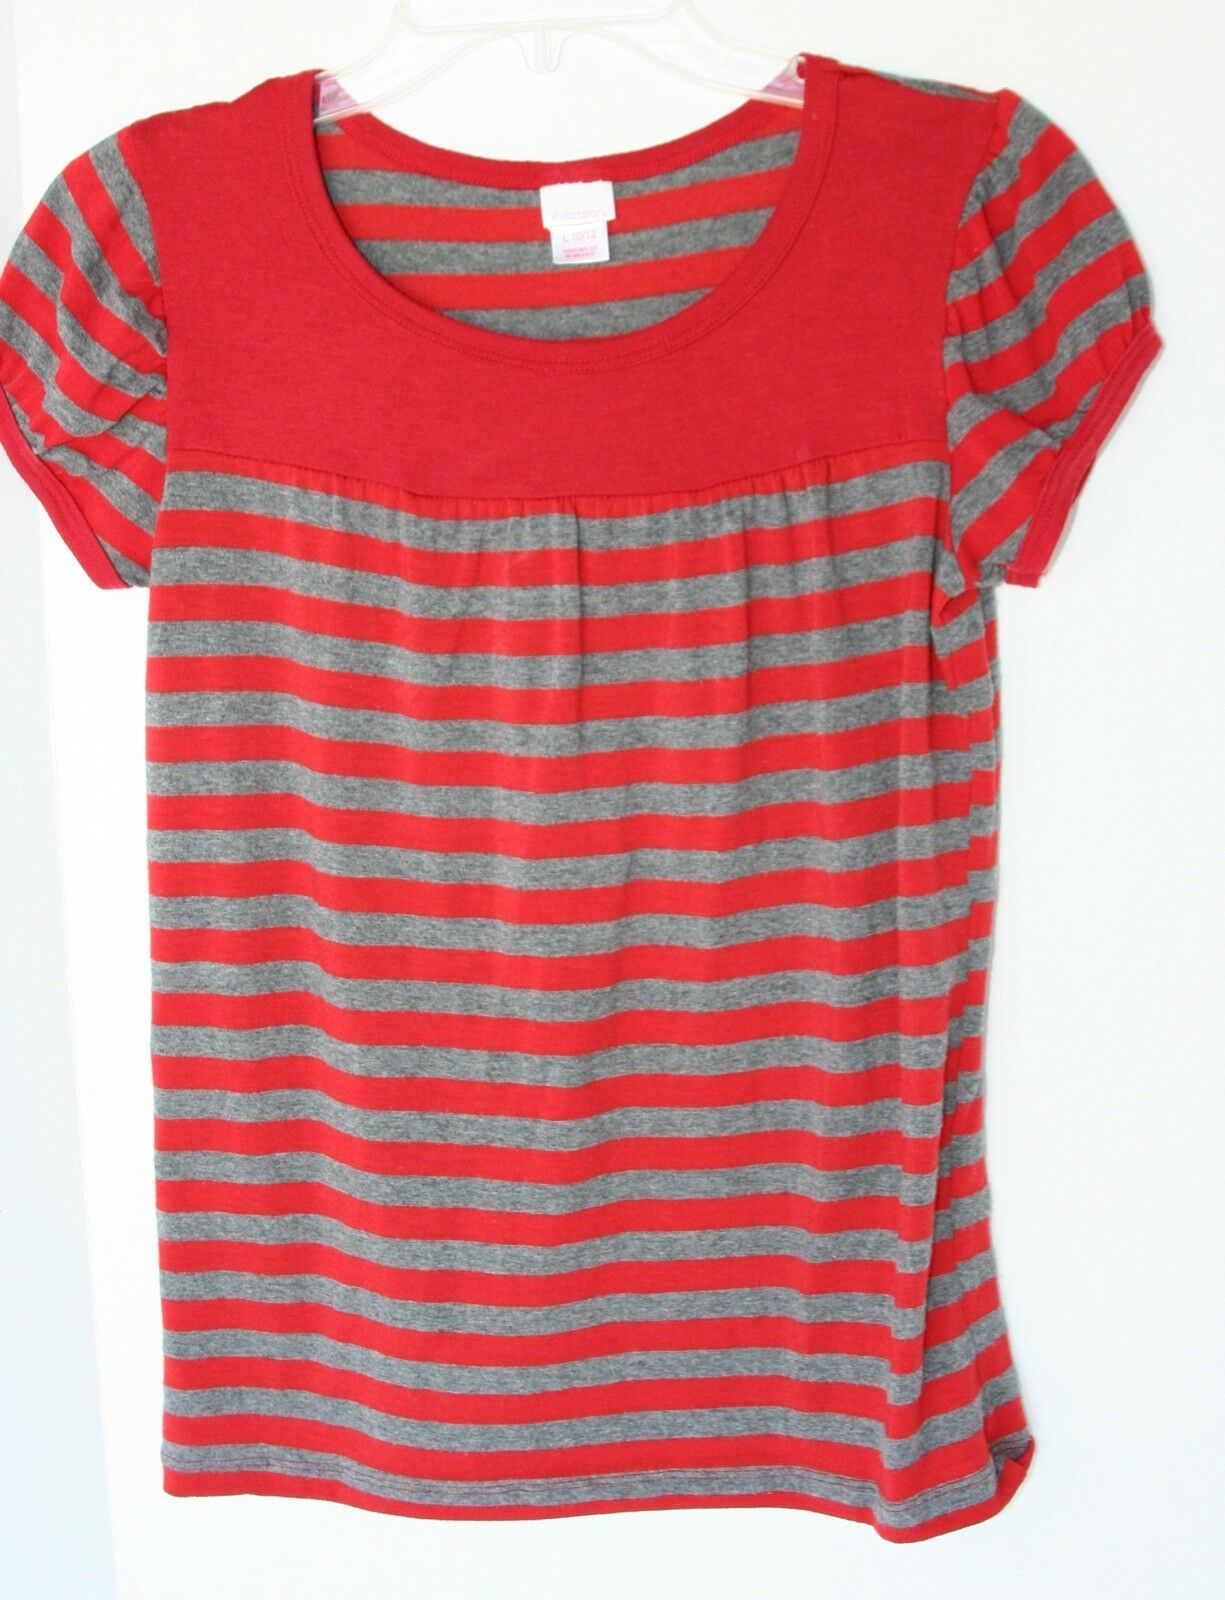 xhilaration Girls Size Large 10/12 Gray and Christmas red Striped Top - $7.91